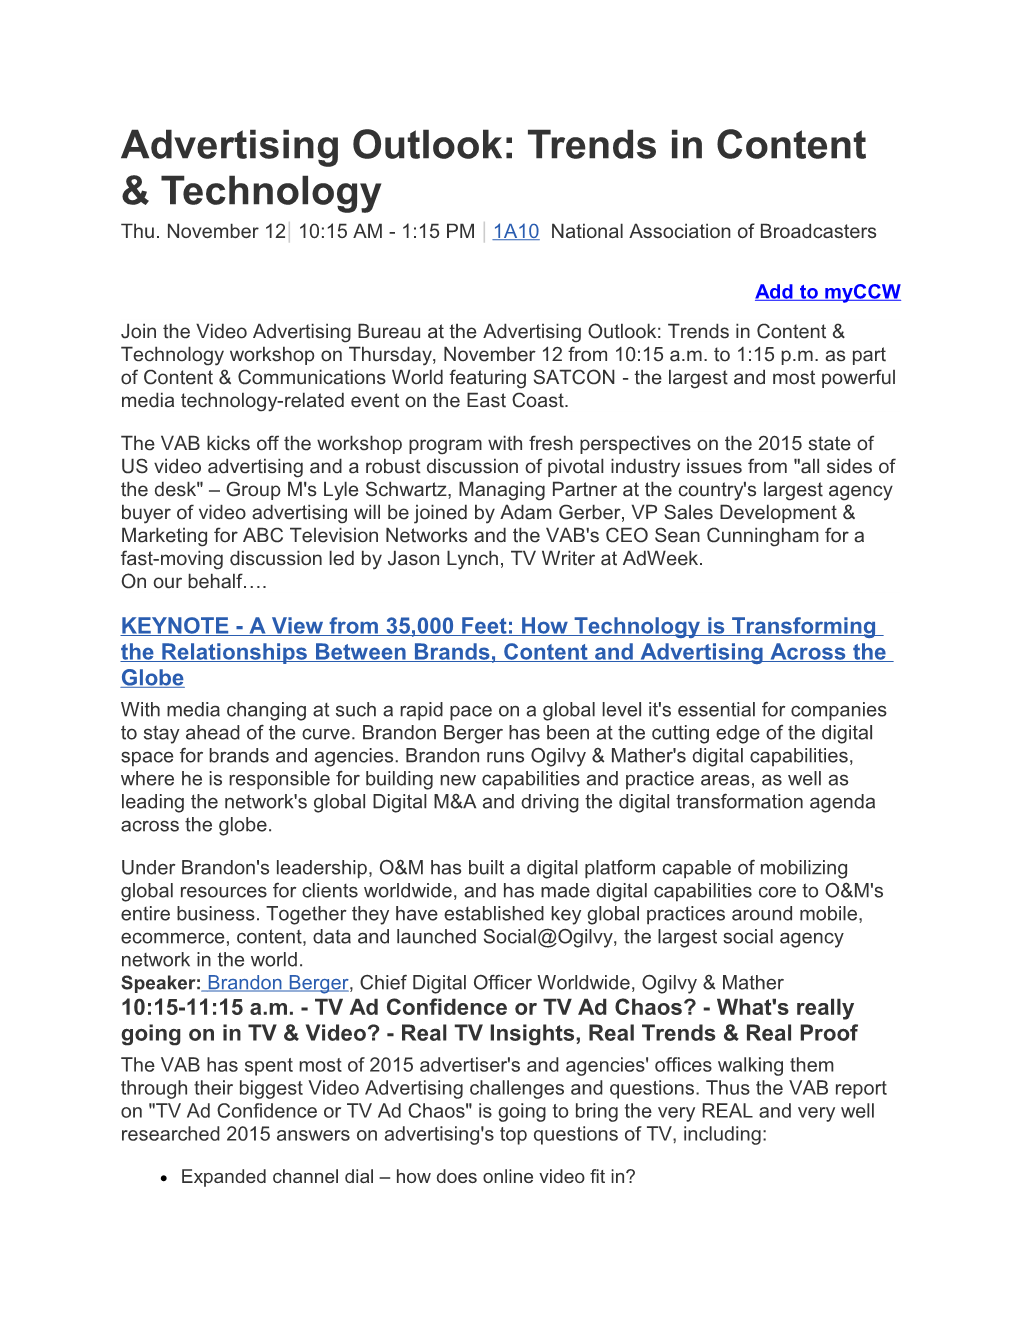 Advertising Outlook: Trends in Content & Technology